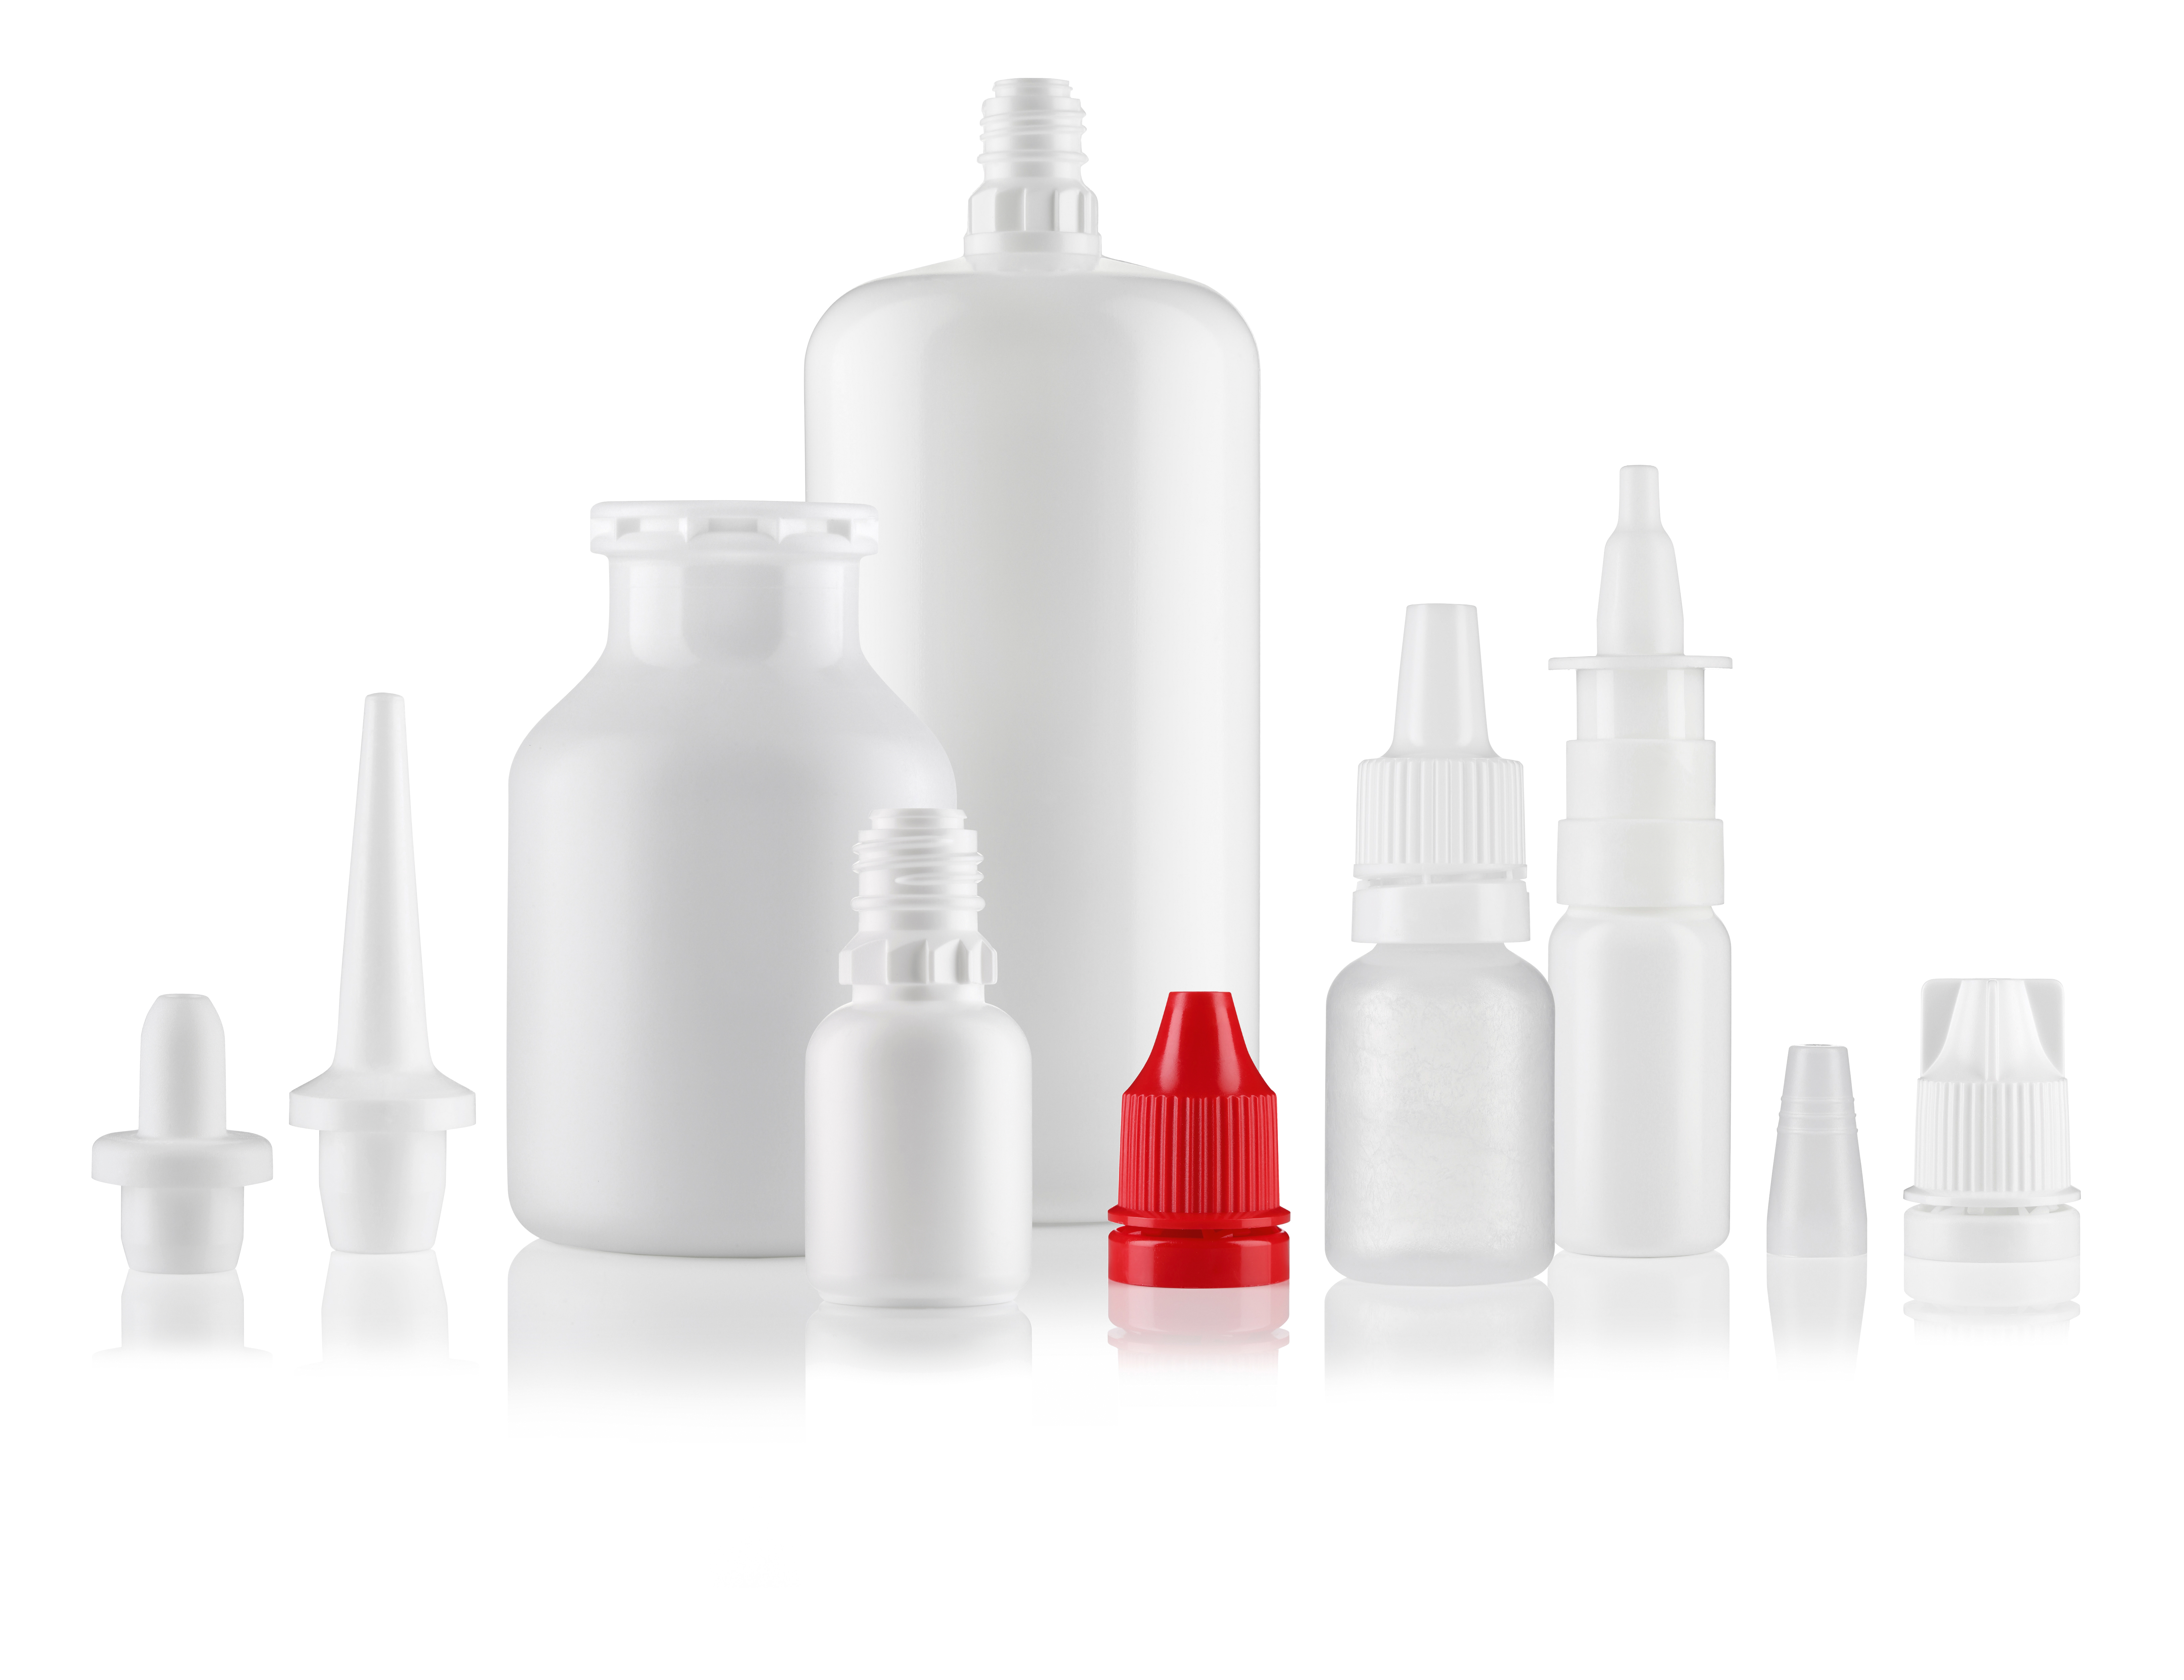 Primary Packaging Plastics - Ophthalmic/nasal applications